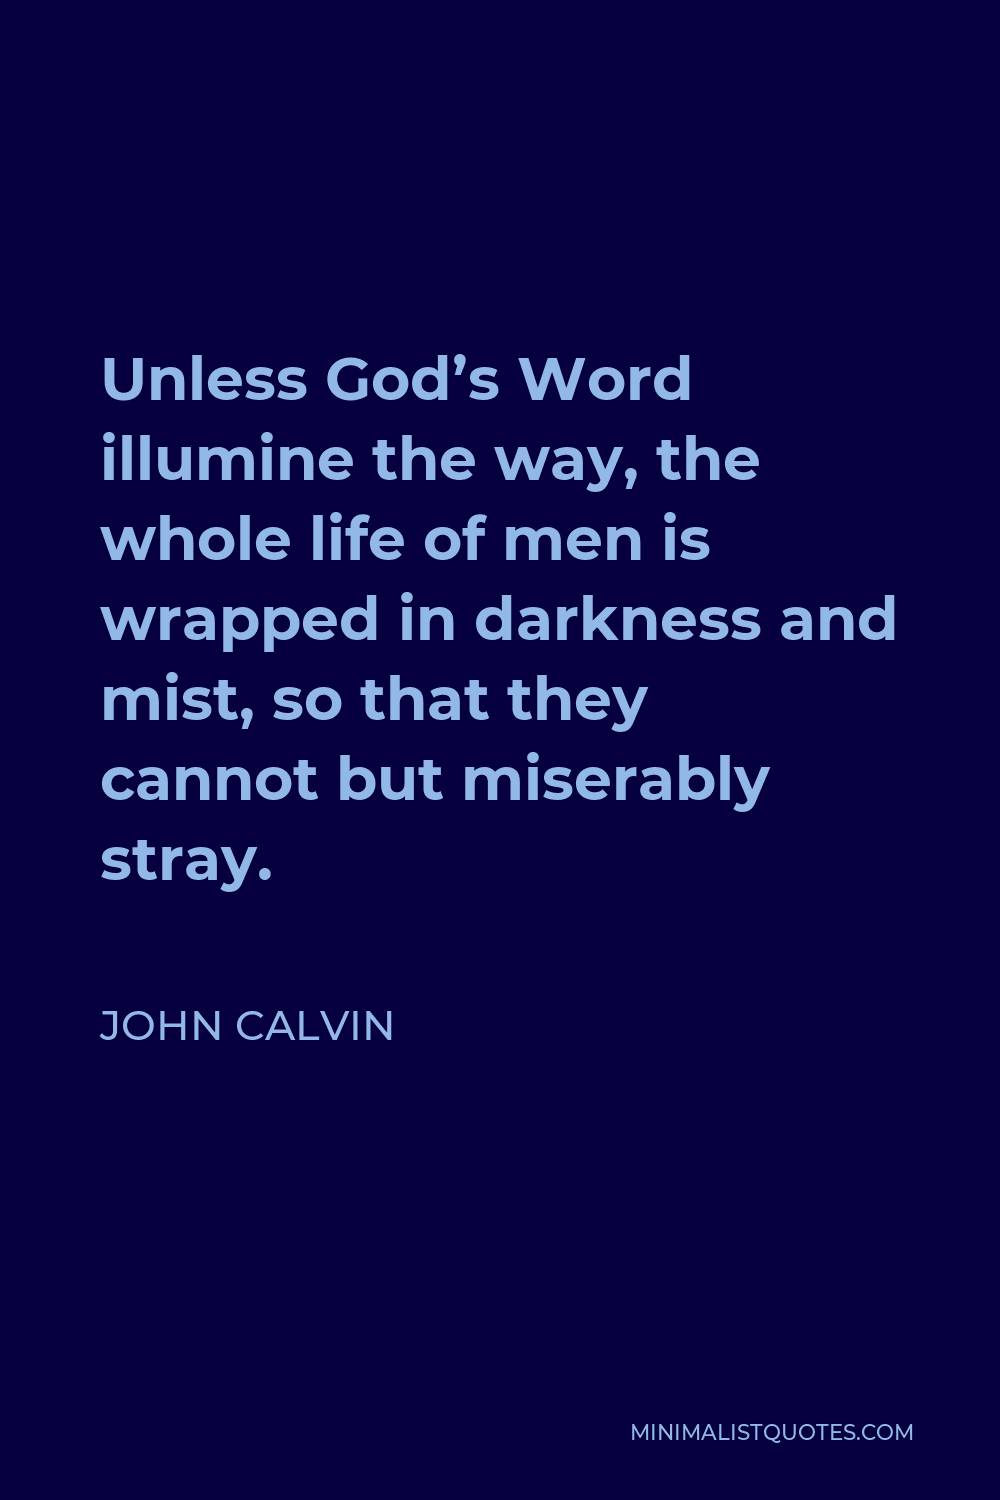 John Calvin Quote - Unless God’s Word illumine the way, the whole life of men is wrapped in darkness and mist, so that they cannot but miserably stray.